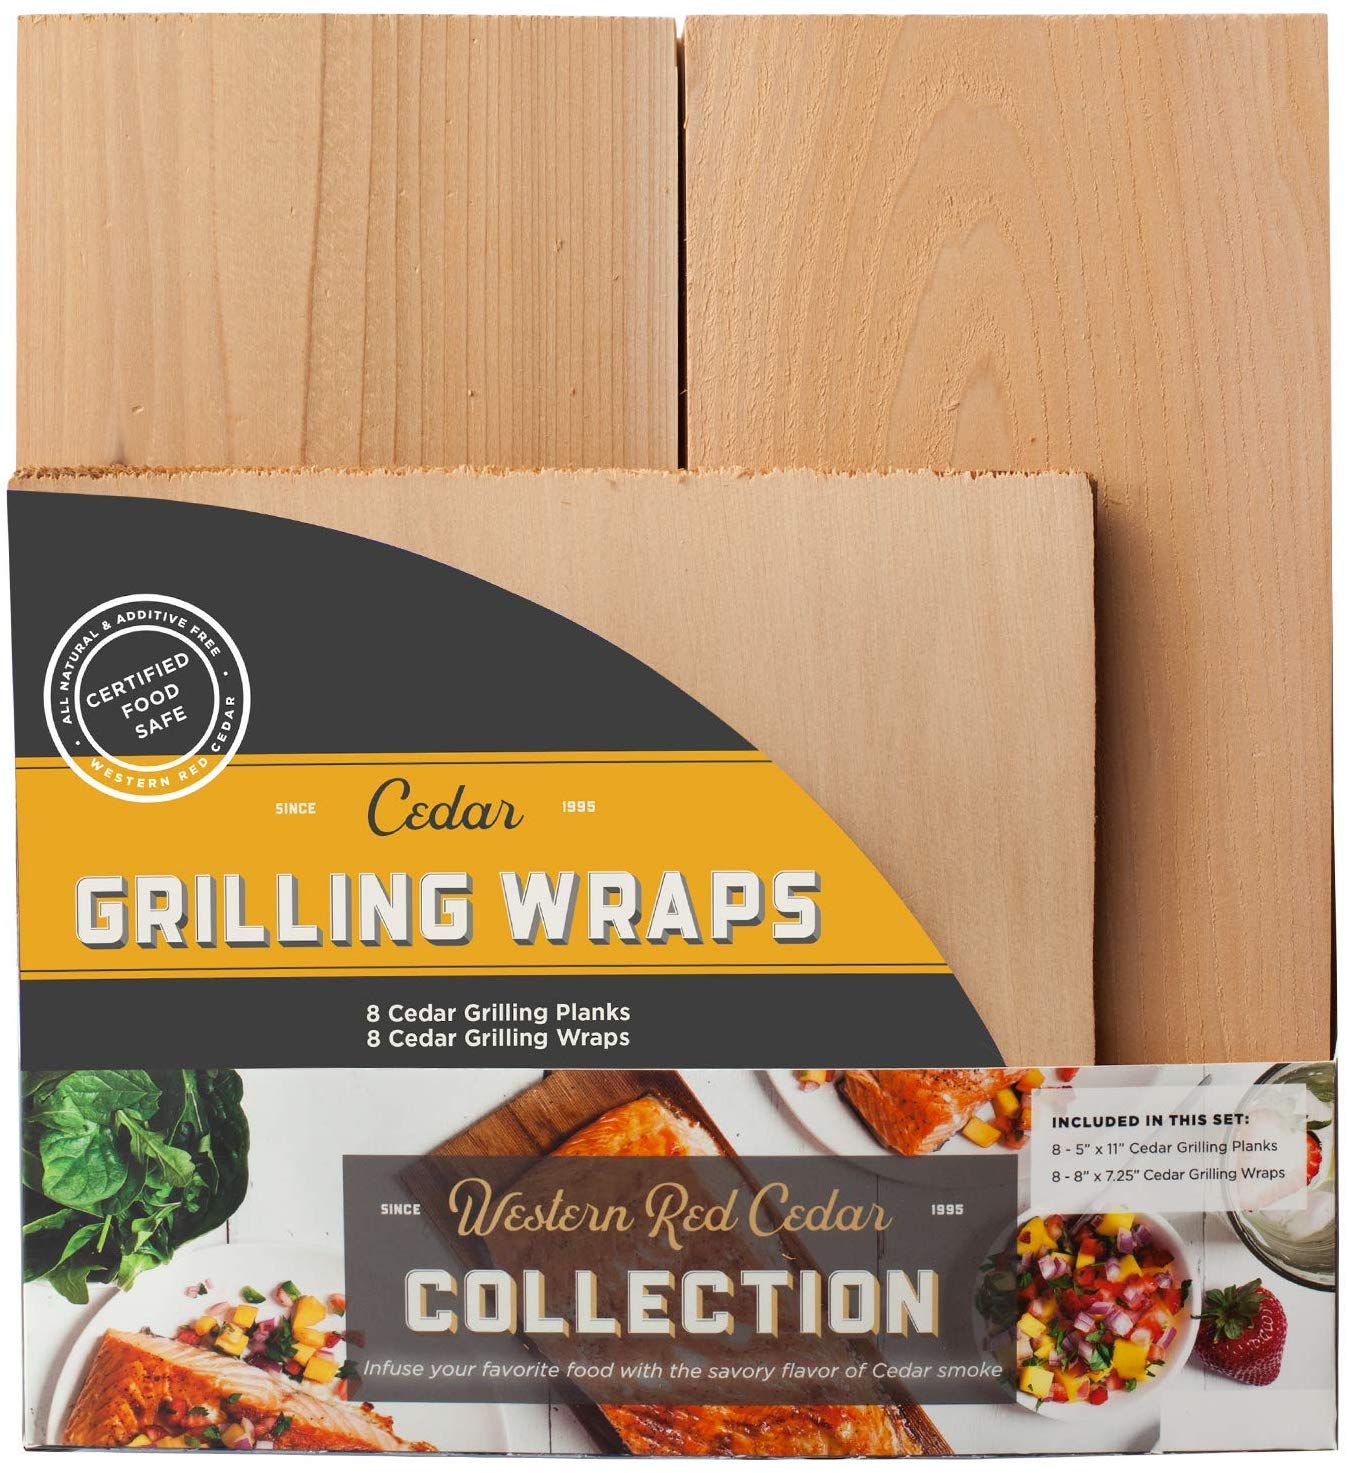 Cedar Grilling Plank and Grilling Wrap Variety Pack - 16 Pieces